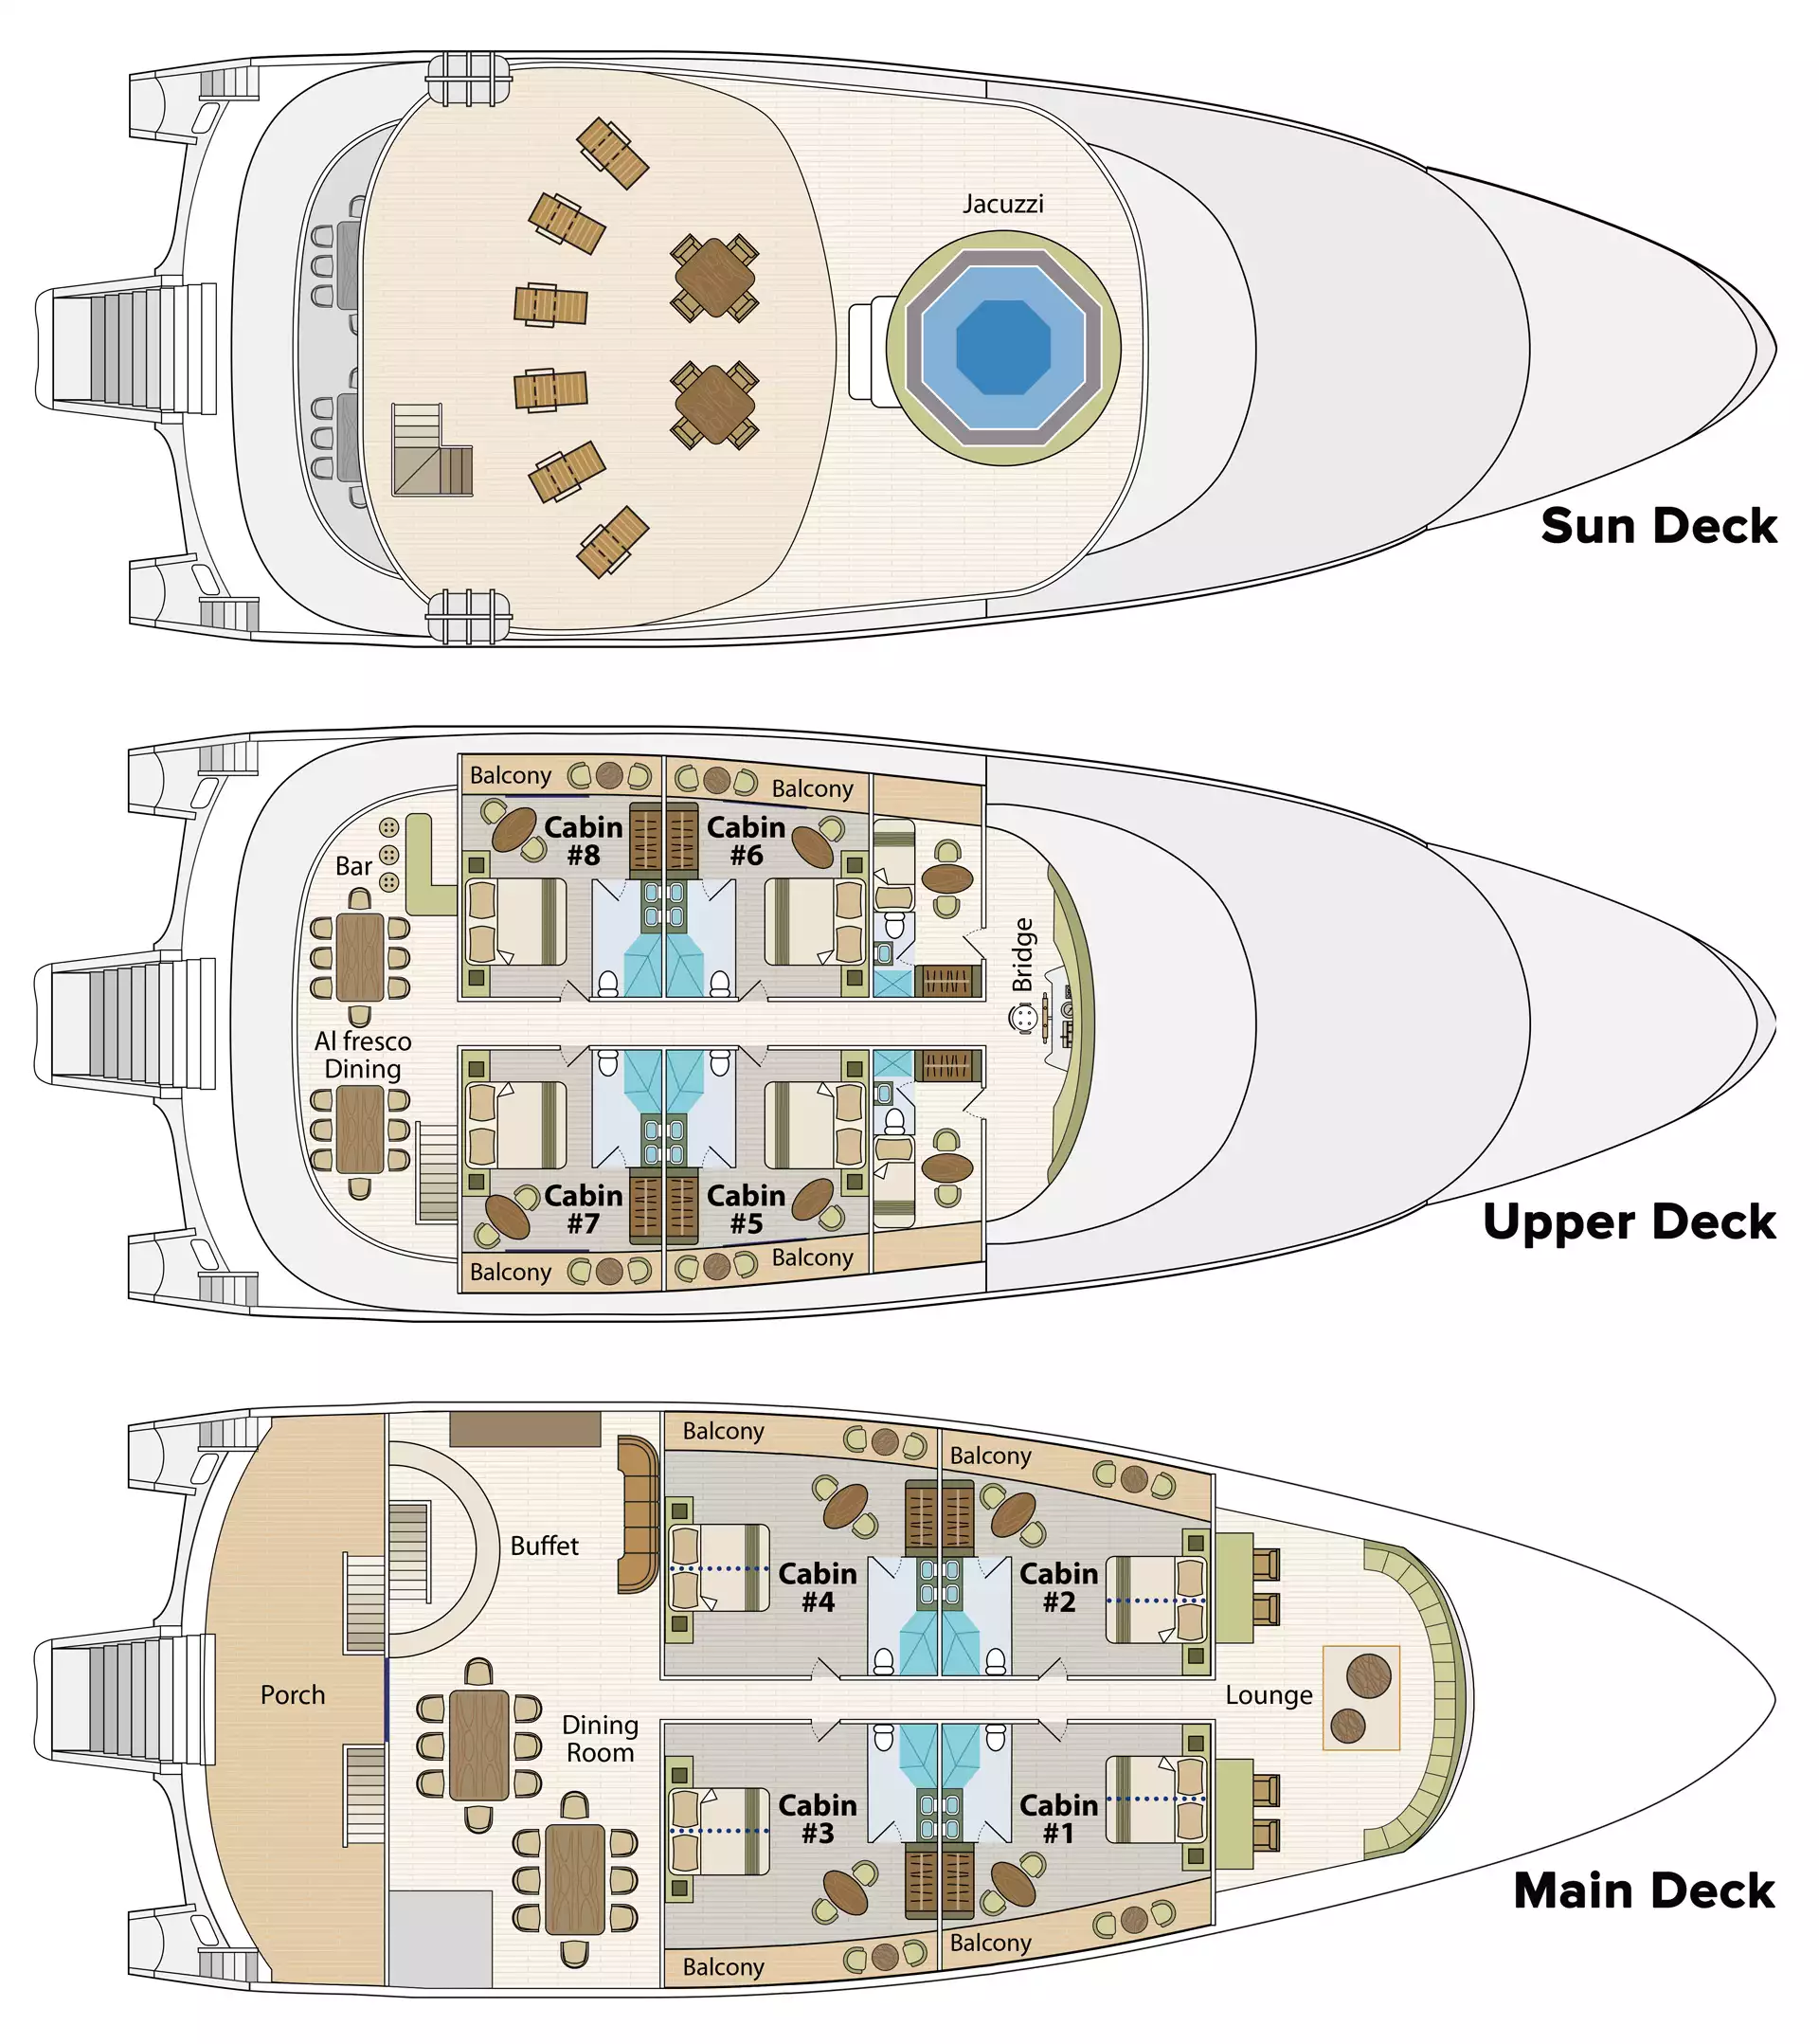 Galapagos Horizon trimaran ship deck plan showing the main, upper & sun decks with 8 total guest staterooms plus a lounge, bar, dining room & porch.